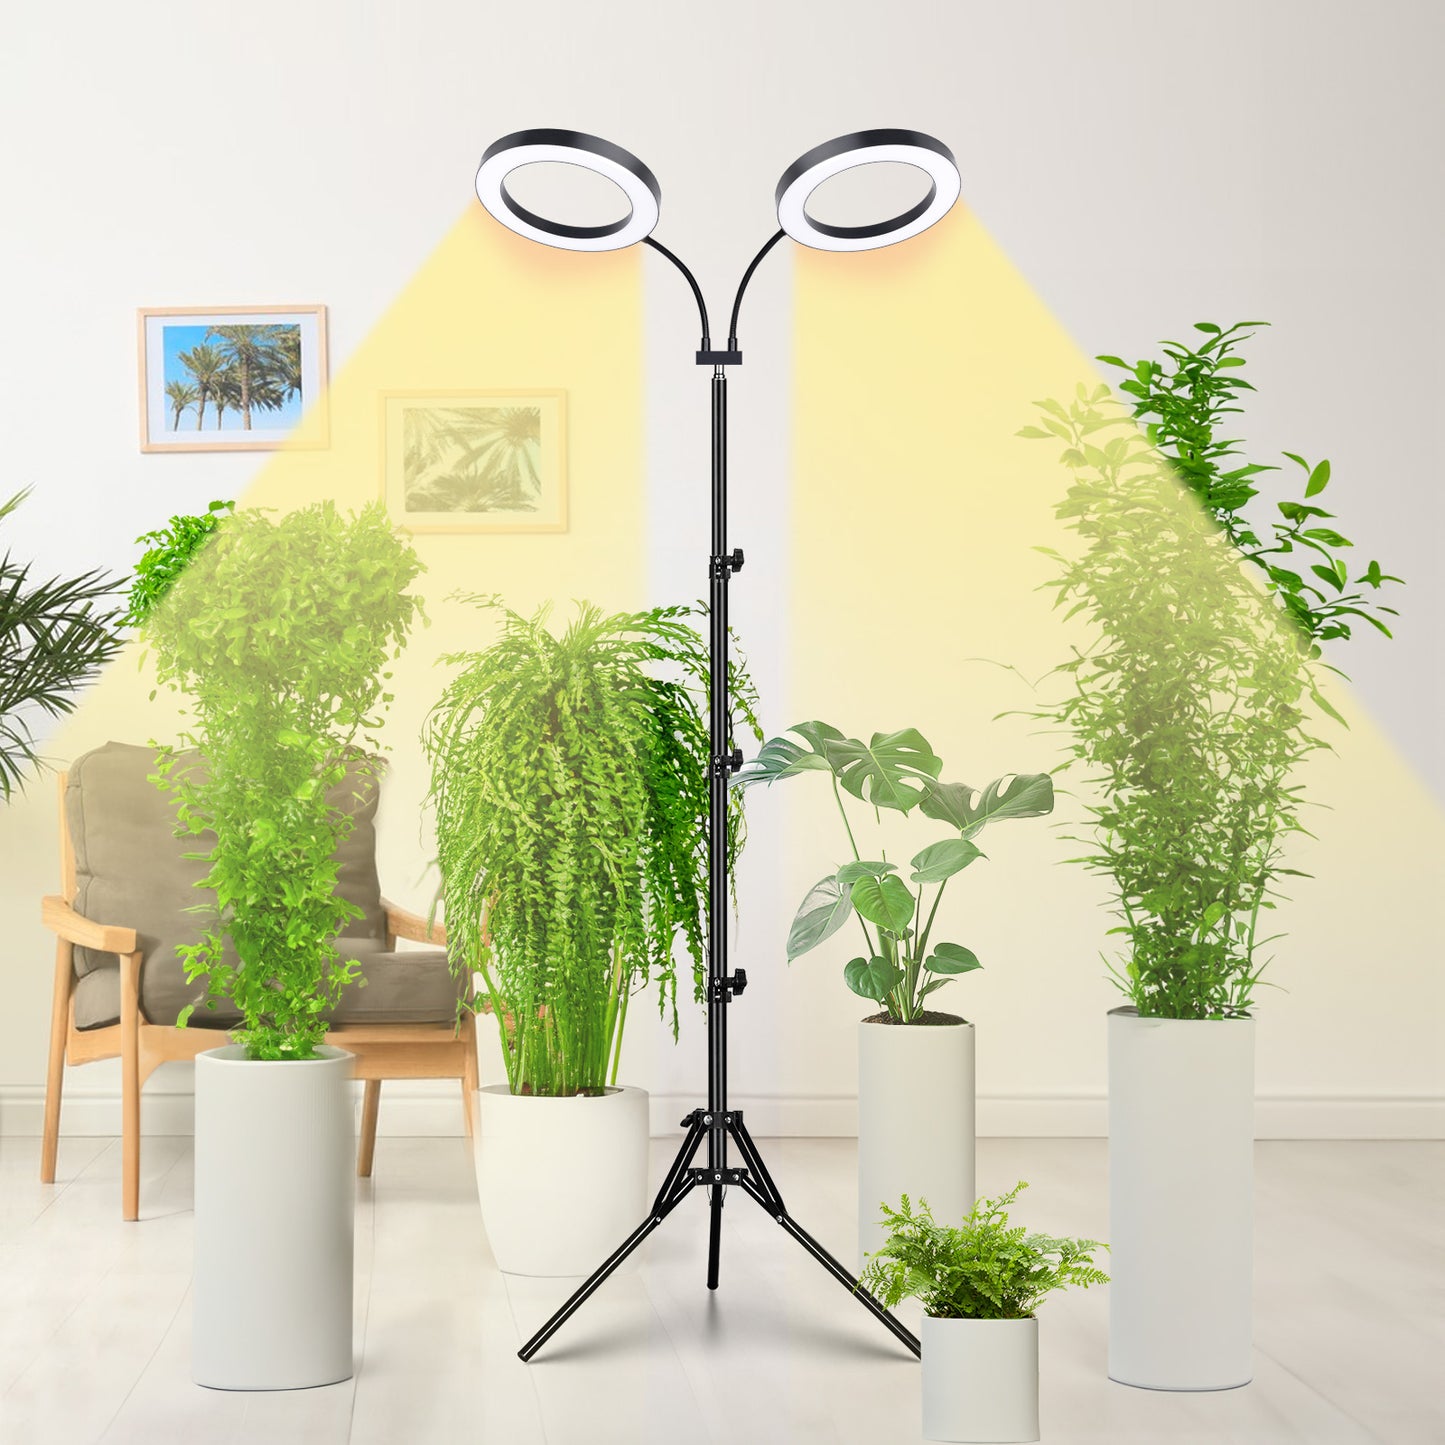 FOXGARDEN 6.3'' Diameter Halo Plant Light with Stand Dual-head